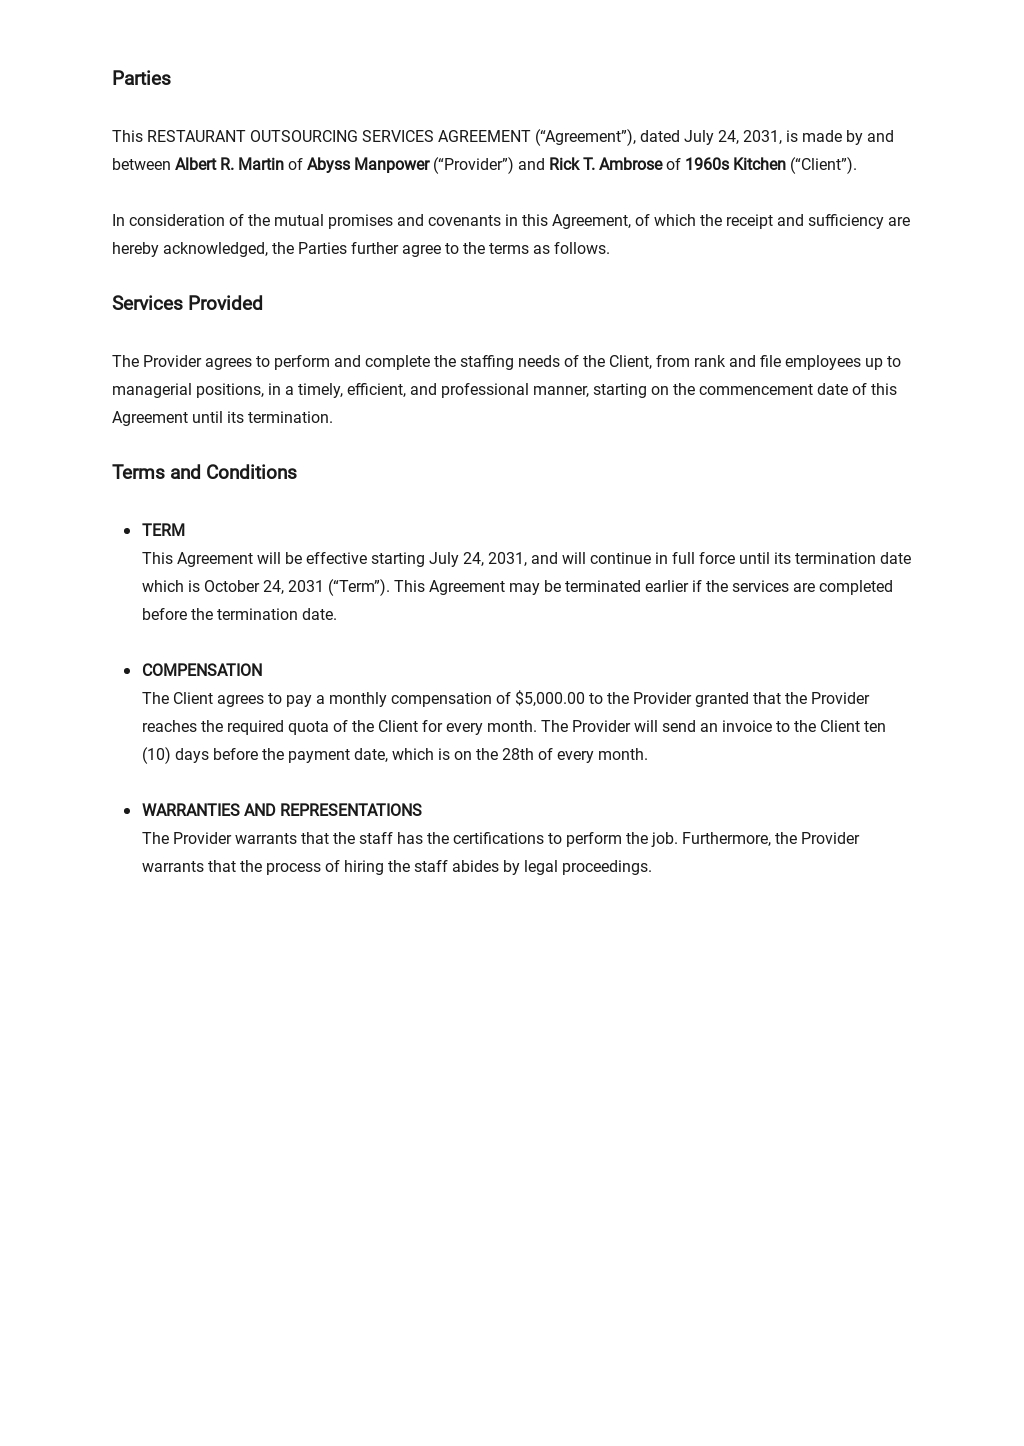 Restaurant Outsourcing Services Agreement Template 1.jpe